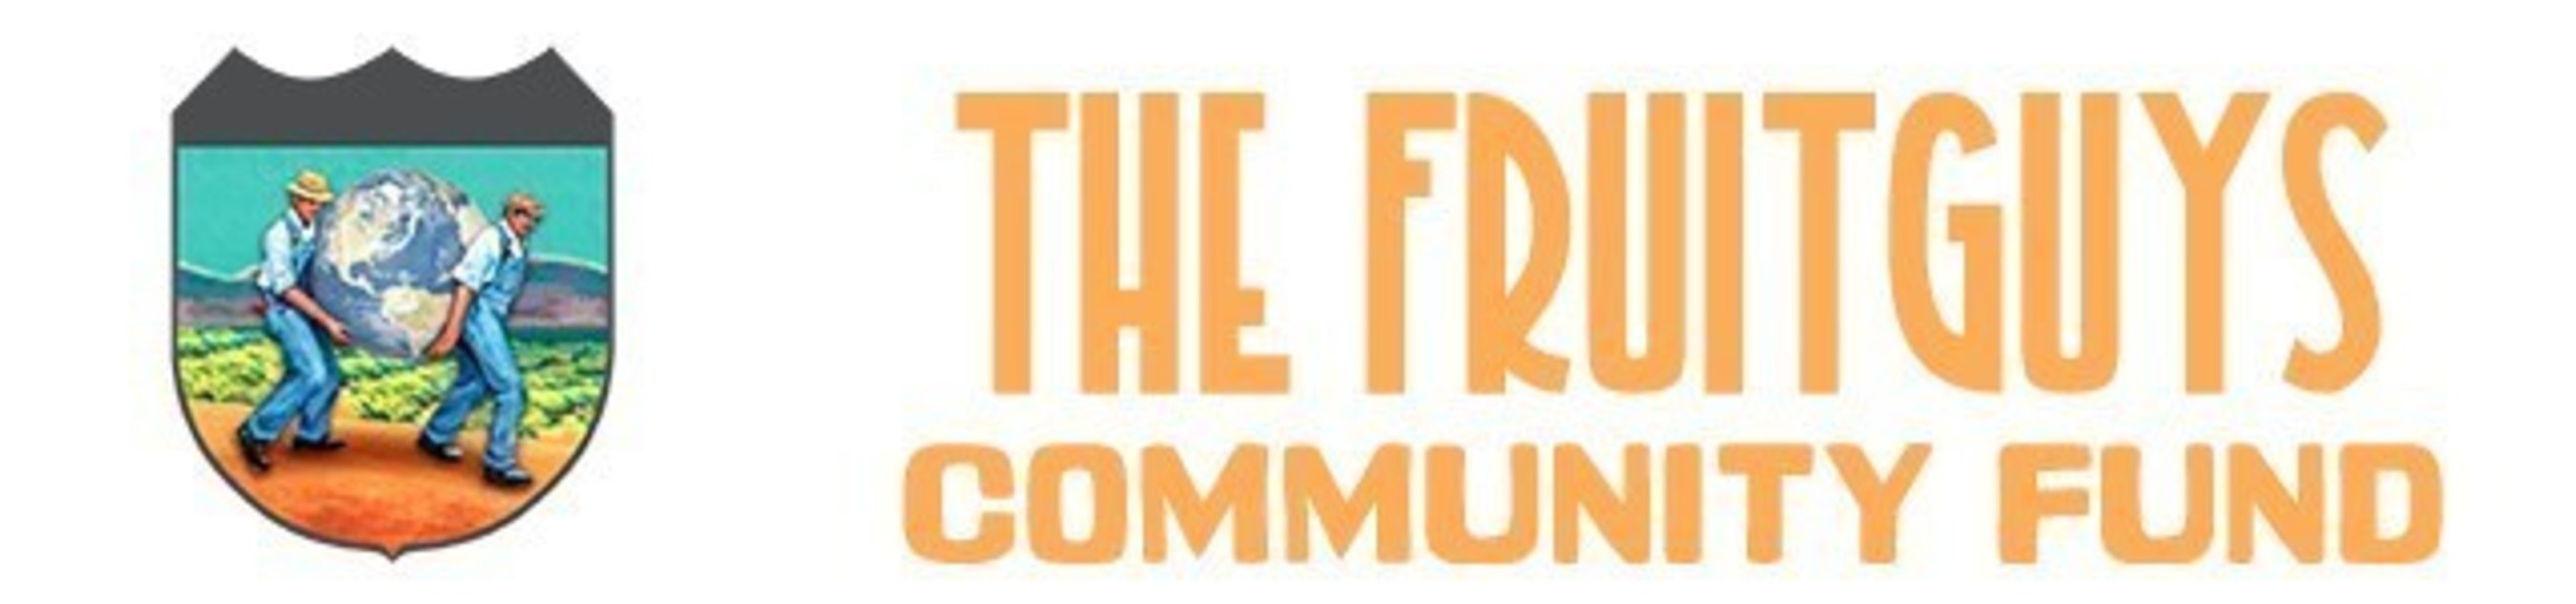 The FruitGuys Community Fund Awards $40,000 In Grants